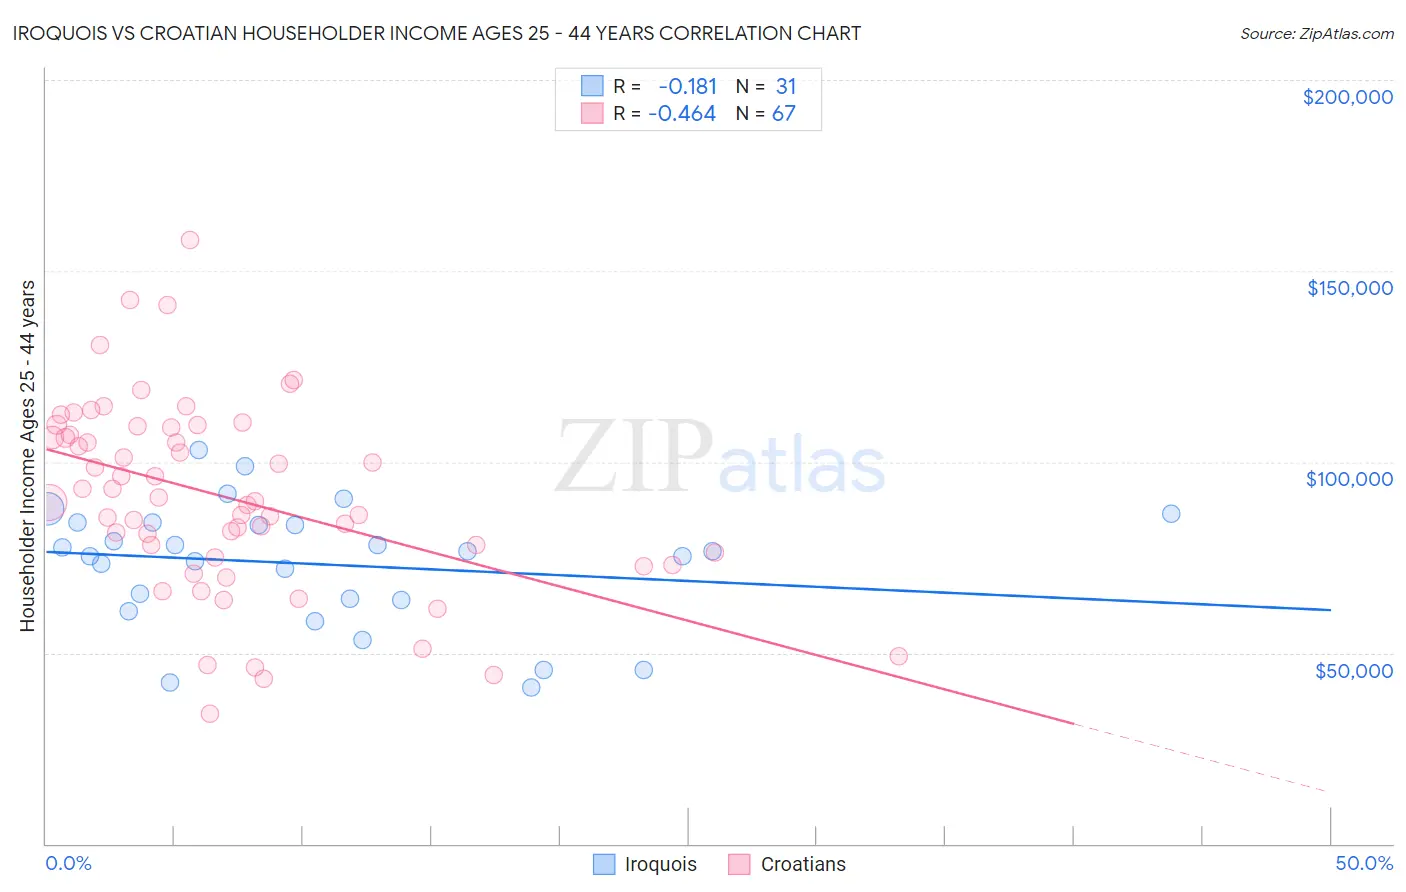 Iroquois vs Croatian Householder Income Ages 25 - 44 years